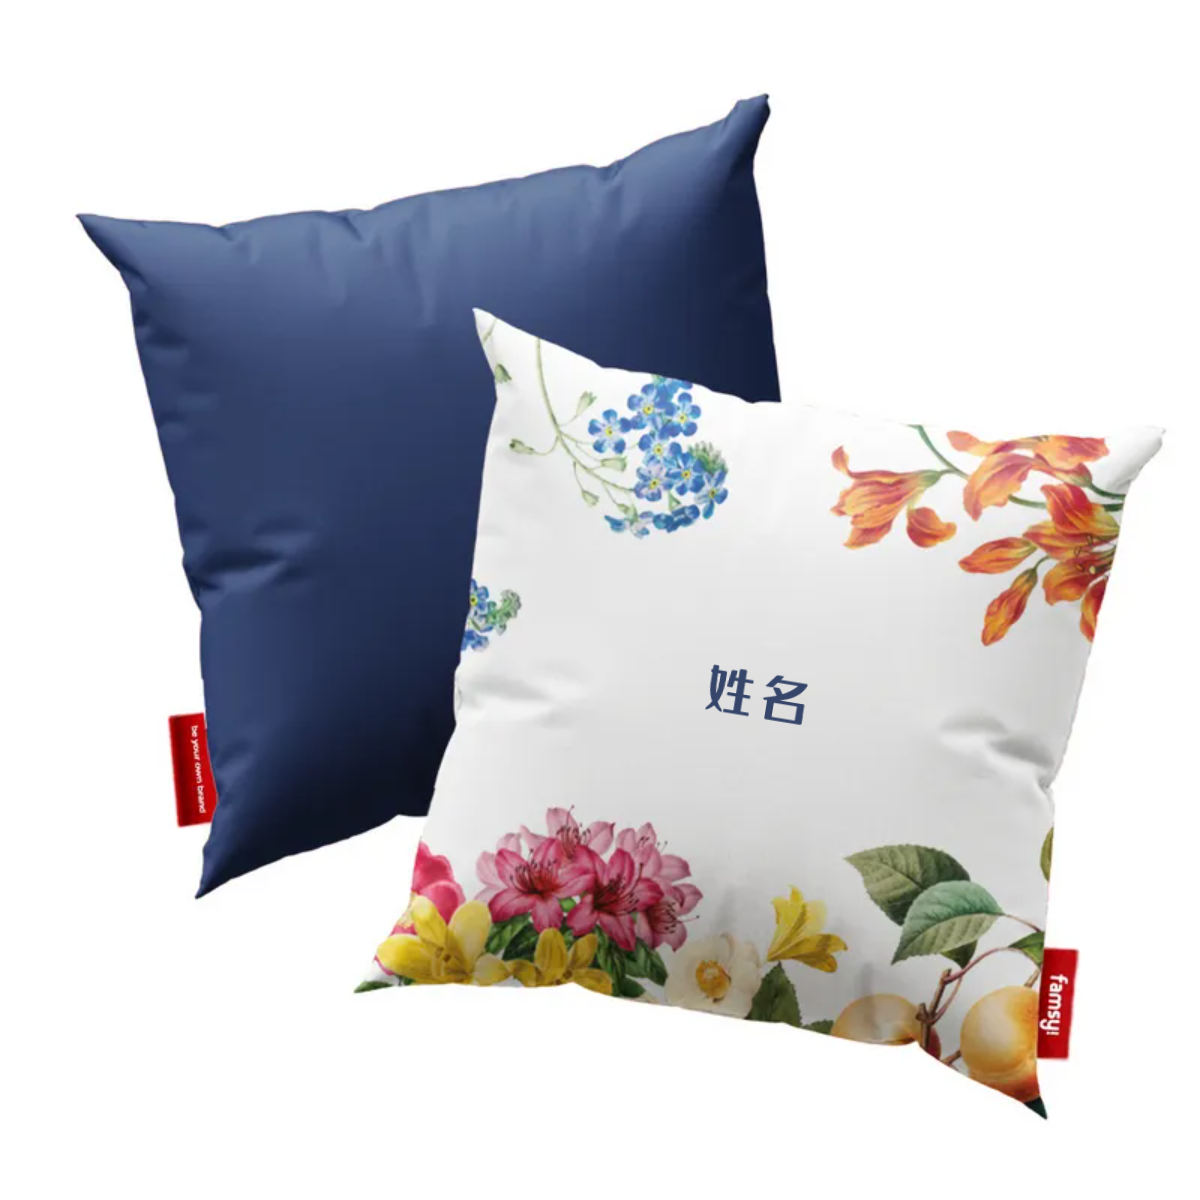 Countless Blessings Series - Full Print Cushion Cover with Inner Cushion